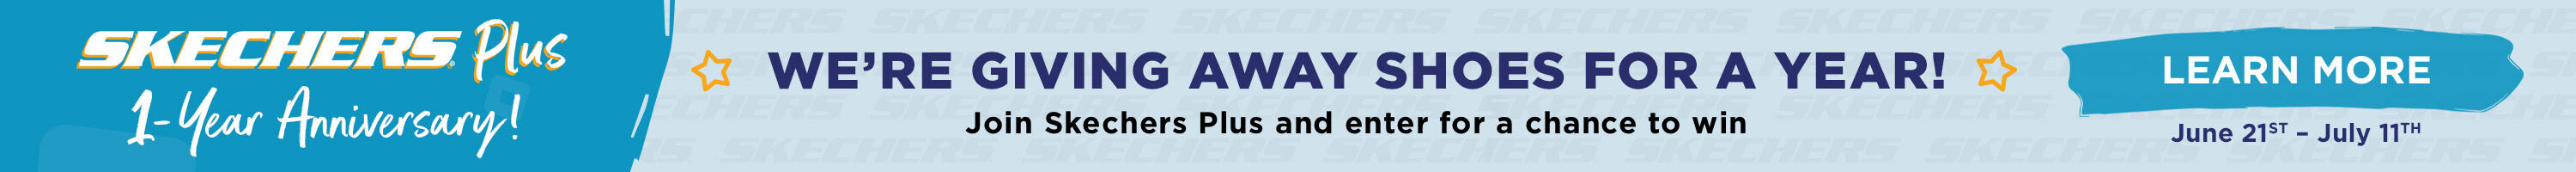 Skecher Plus Anniversary - Shoes for a Year - Learn more